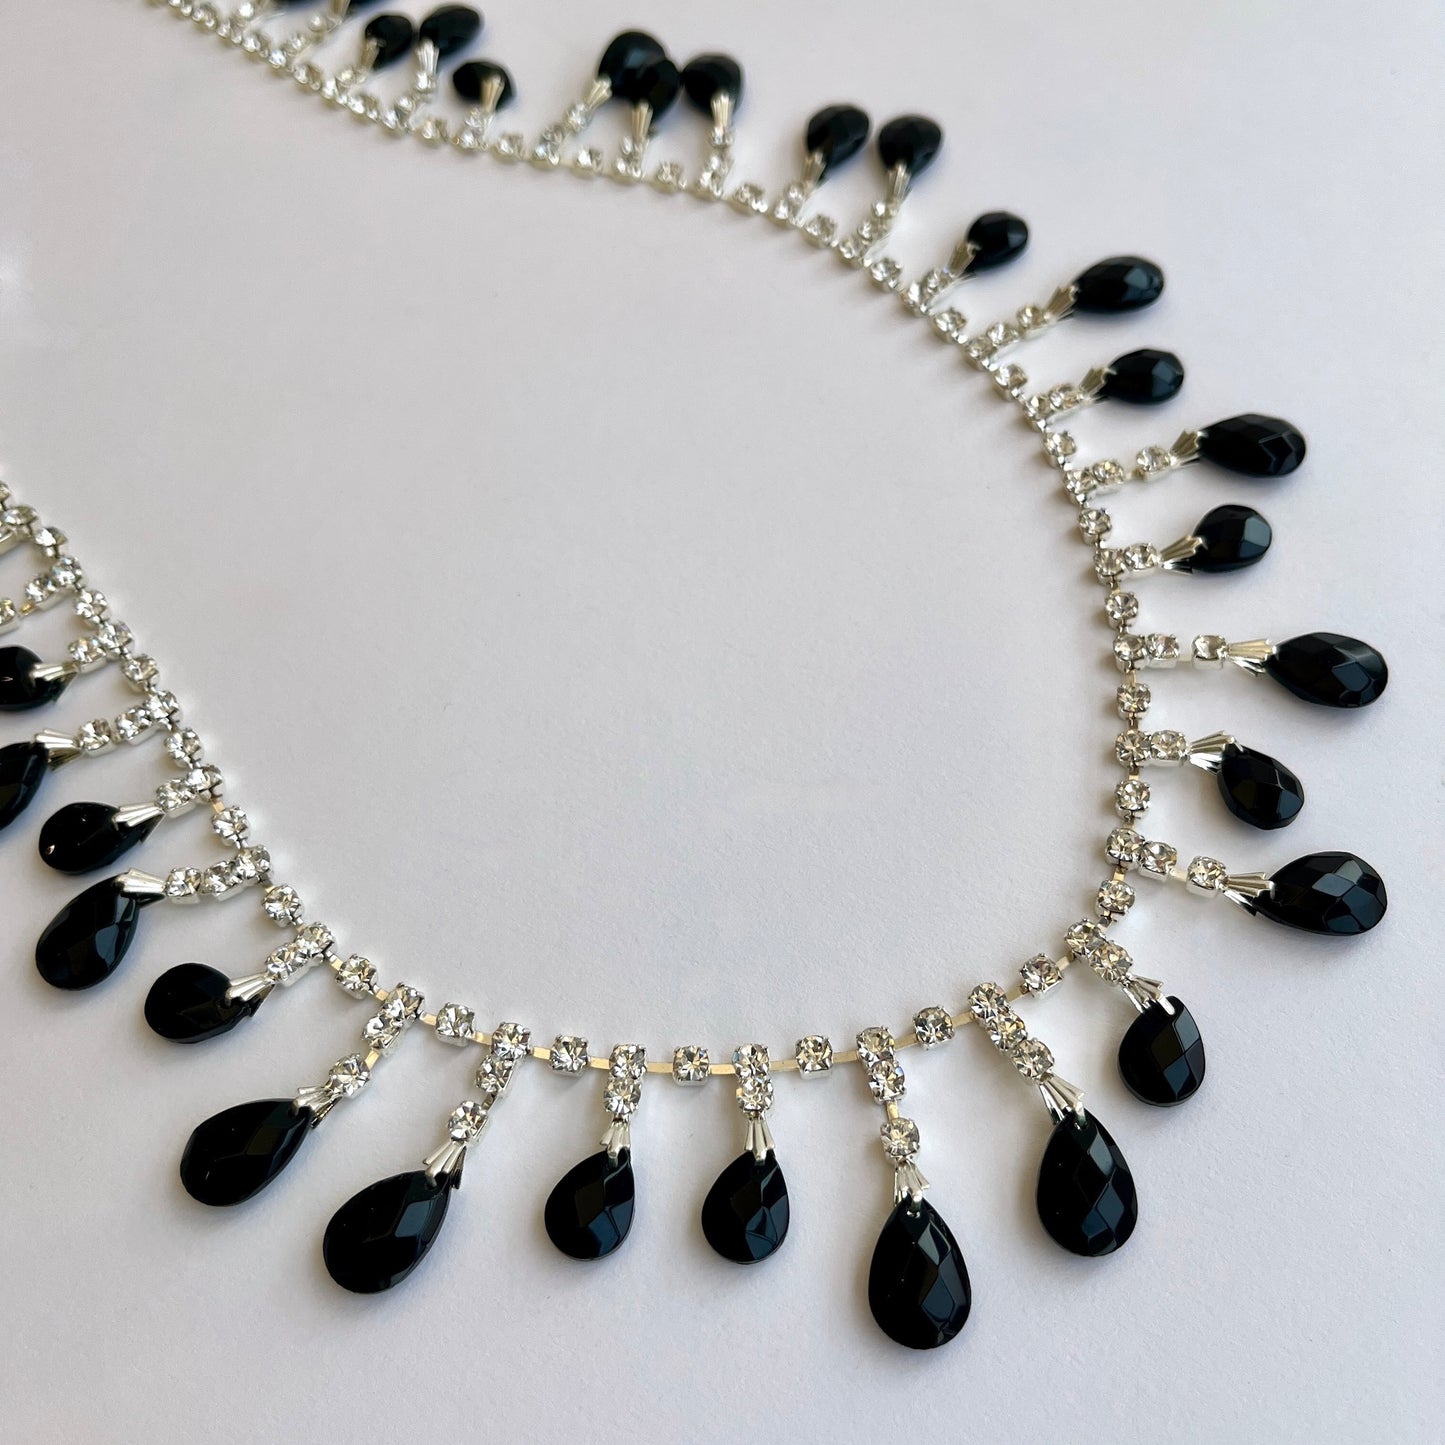 Fabulous rhinestone and faux jet beaded trim made premium high grade diamanté crystals set in a flexible metal chain casing.